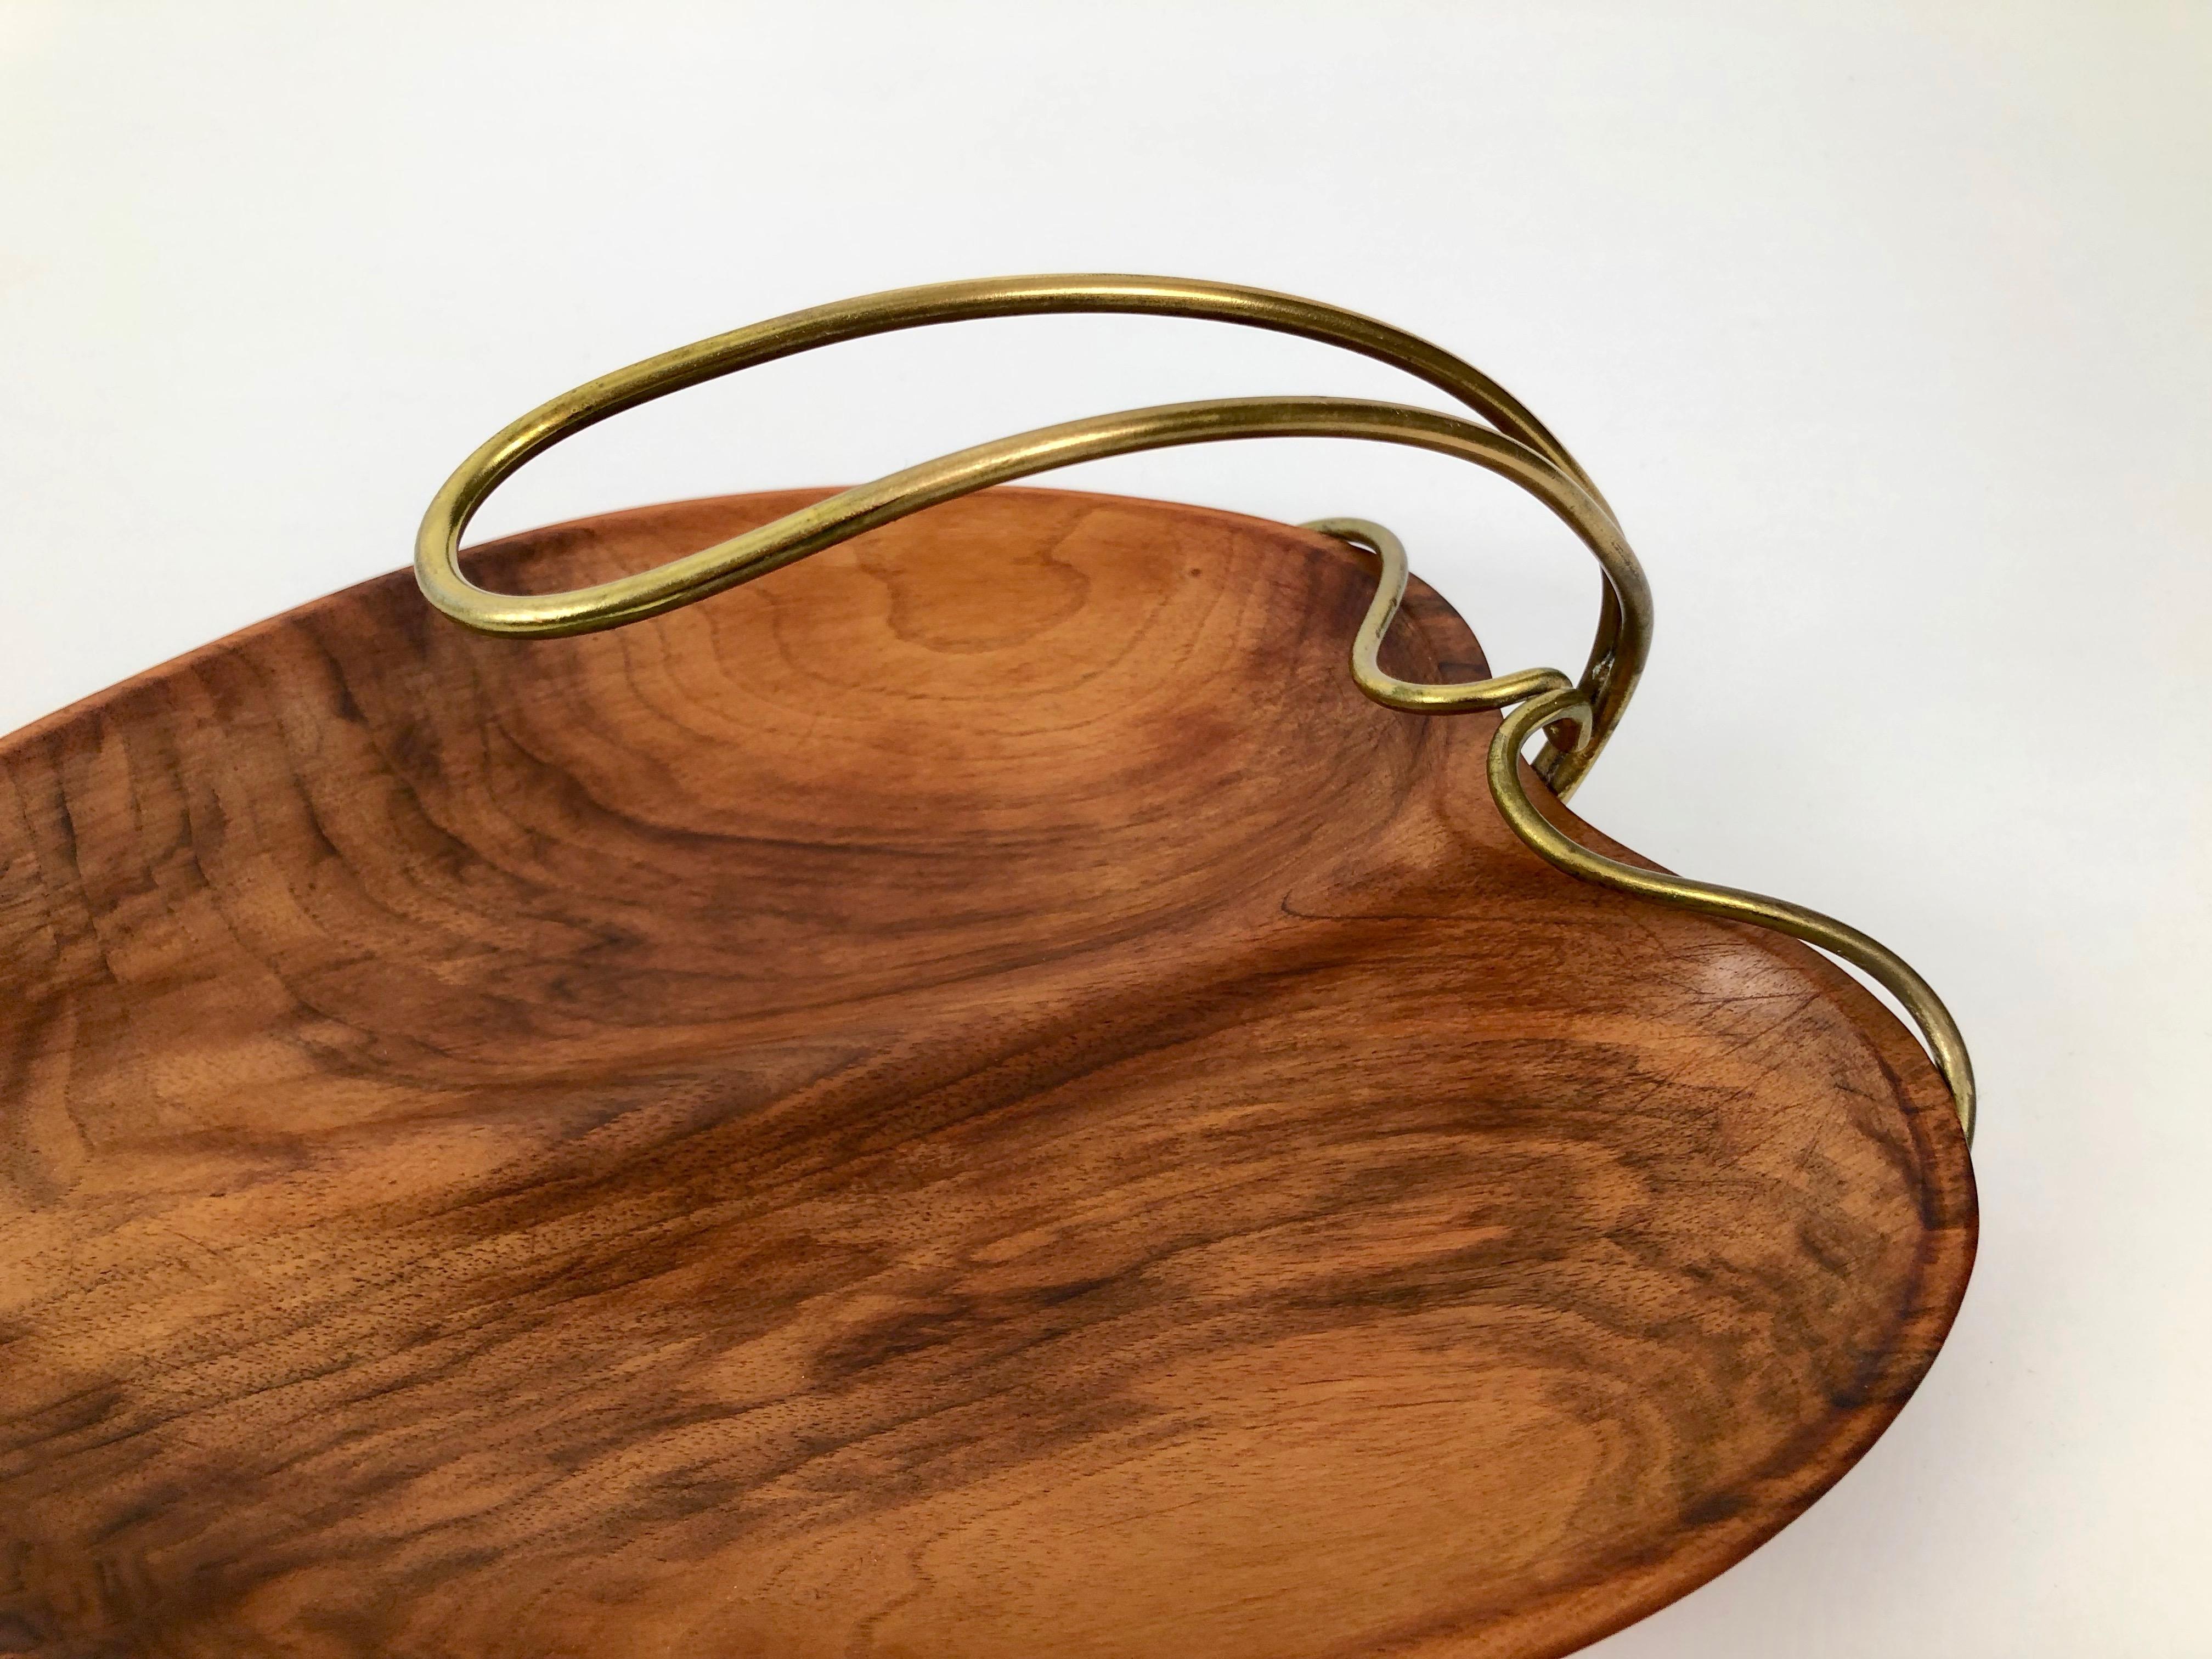 Polished Mid-Century Walnut Bowl in Shape of a Leaf, 1950's Austria For Sale